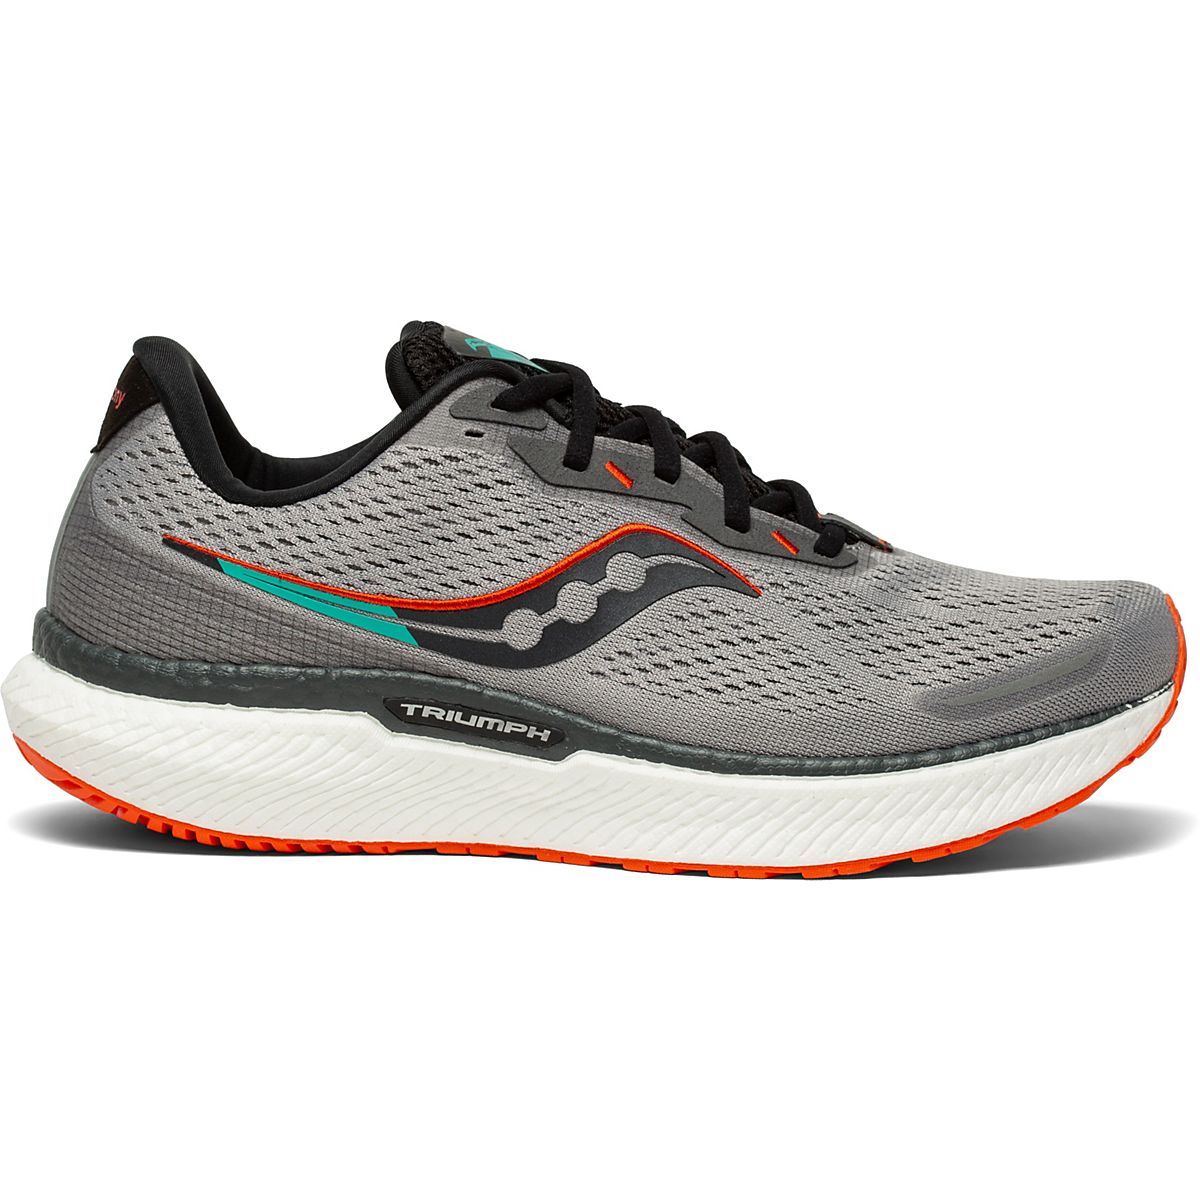 Saucony Men's Triumph 19 Running Shoes | Free Shipping at Academy